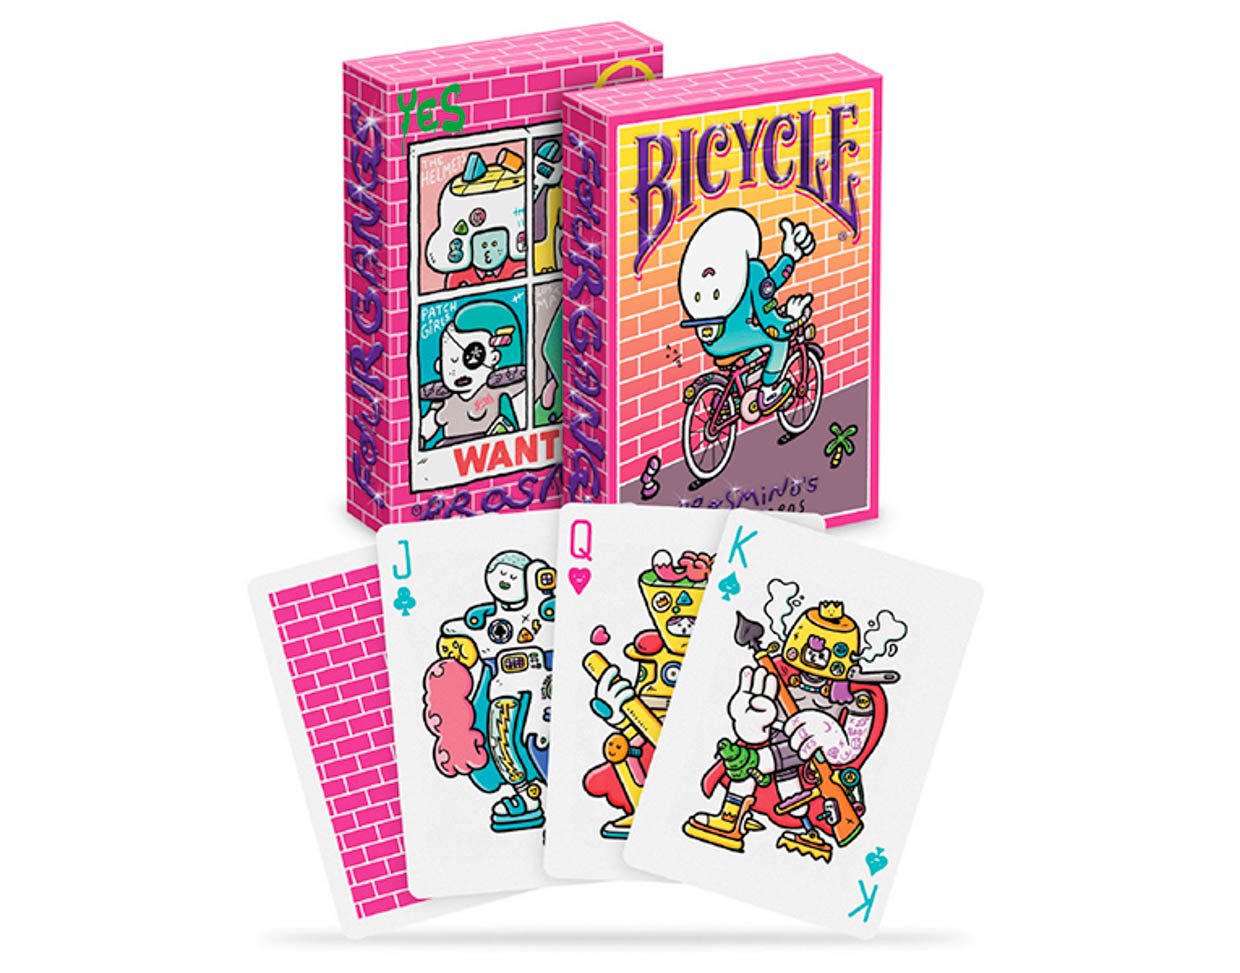 Bicycle Brosmind’s Four Gangs Playing Cards